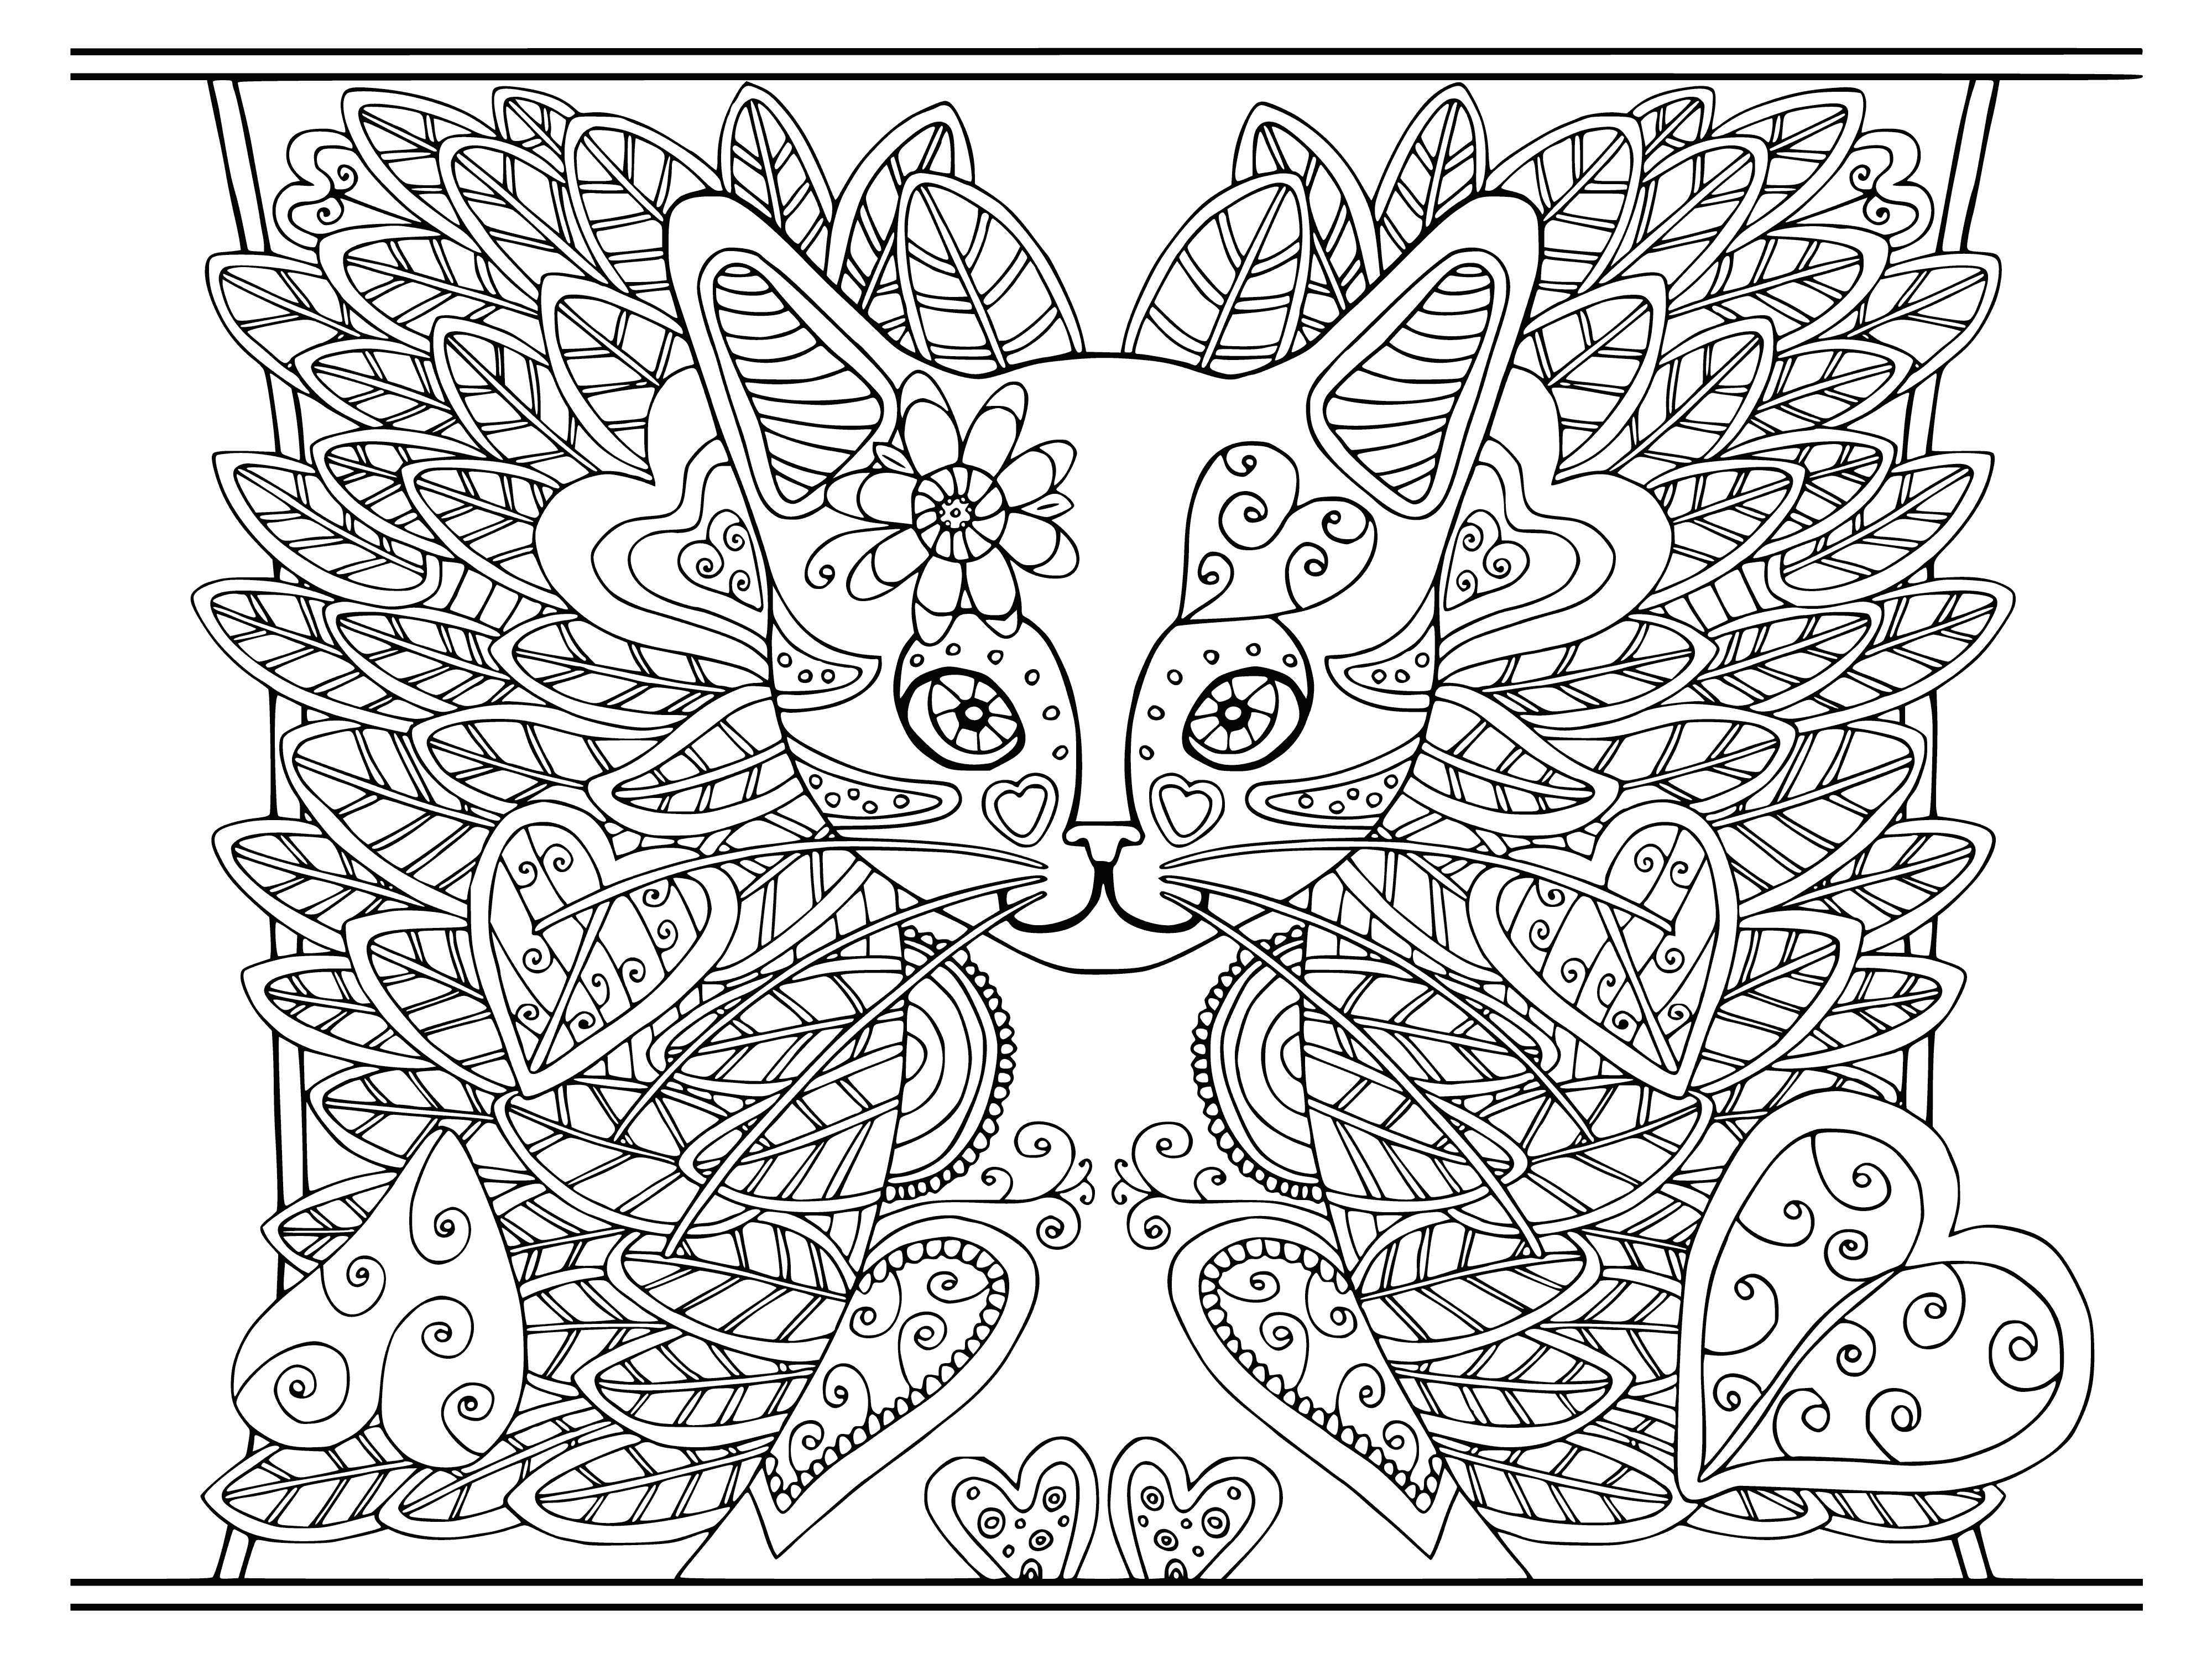 coloring page: Stressed cat with dark fur & large yellow eyes has its head in its paw.